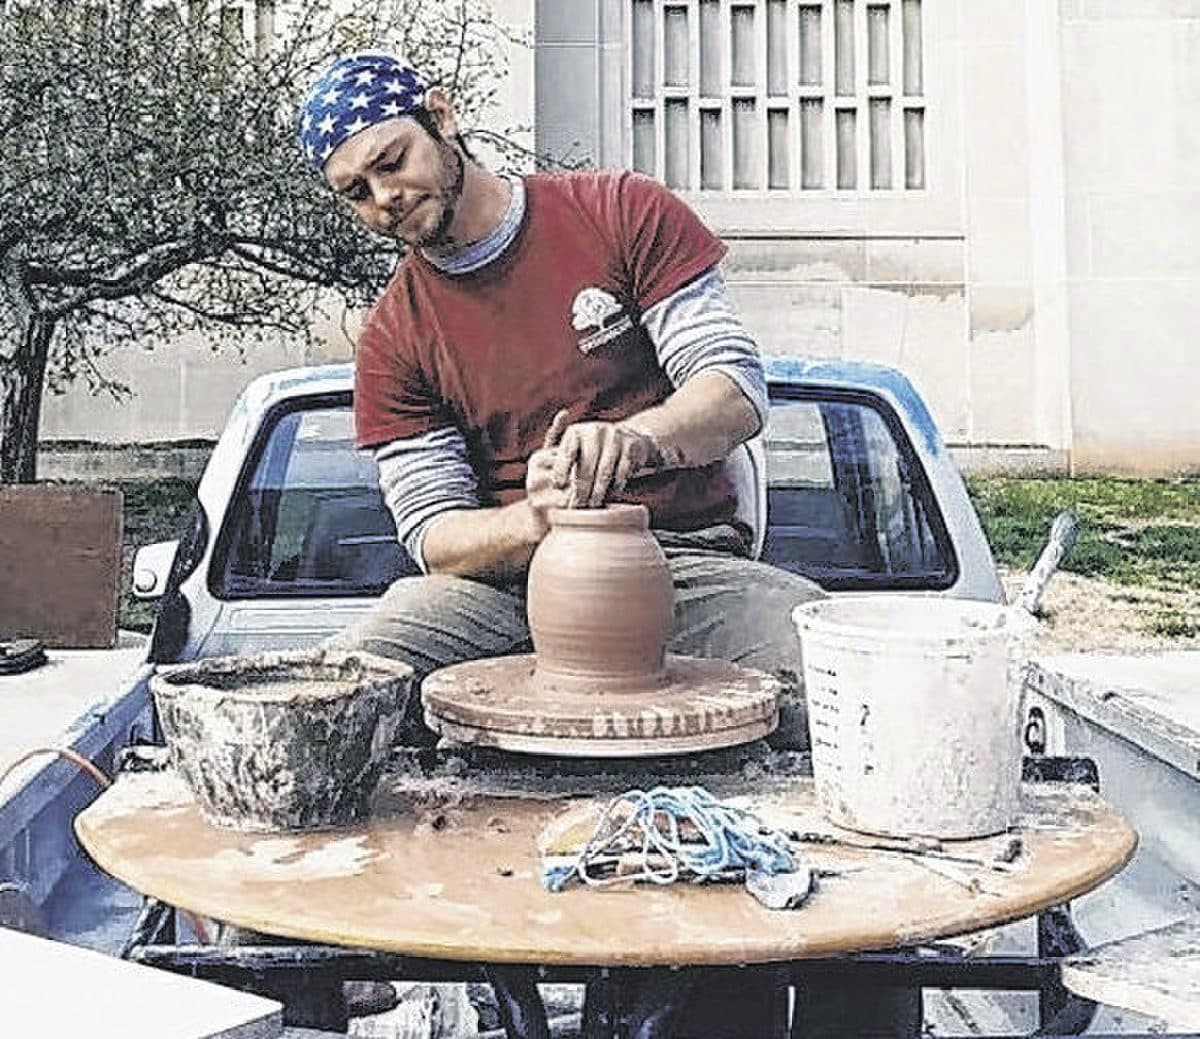 Local potter Dylan Quackenbush will demonstrate on a potter's wheel at the Village Art Walk on Oct. 23.  Submitted photo